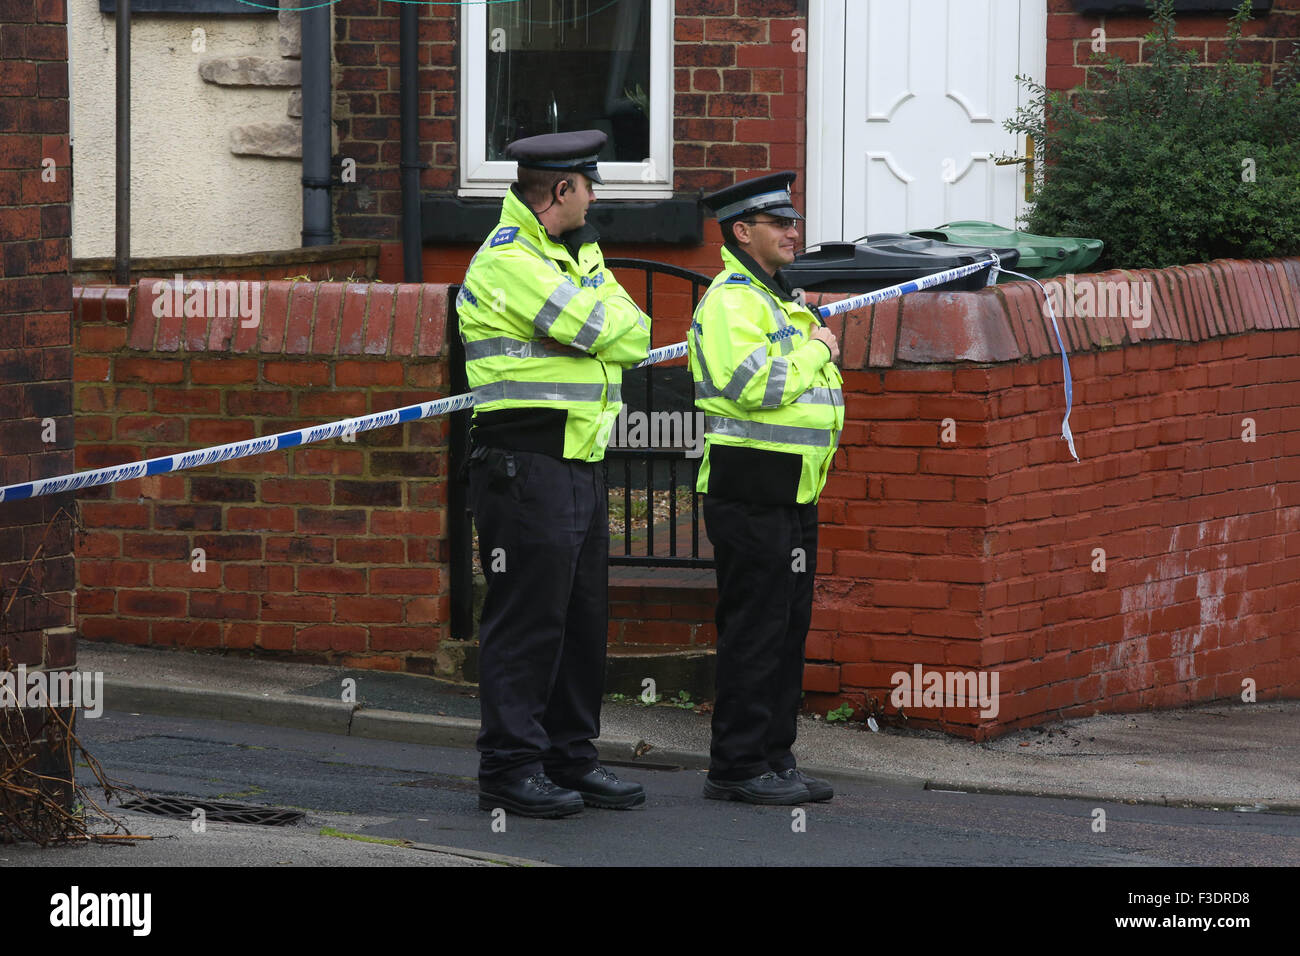 Leeds, Yorkshire, UK. 6th October, 2015. Police guard the scene of a murder in Leeds, West Yorkshire, on October 6th 2015. Police were called to Moorfield Avenue in Armley, Leeds, UK late last night. Officers searched the area and found a 27-year-old man in Back Moorfield Terrace. Although paramedics treated the man, he was pronounced dead at the scene. A 43-year-old man has been arrested on suspicion of murder and is currently in custody.  Ian Hinchliffe /Alamy Live News Stock Photo